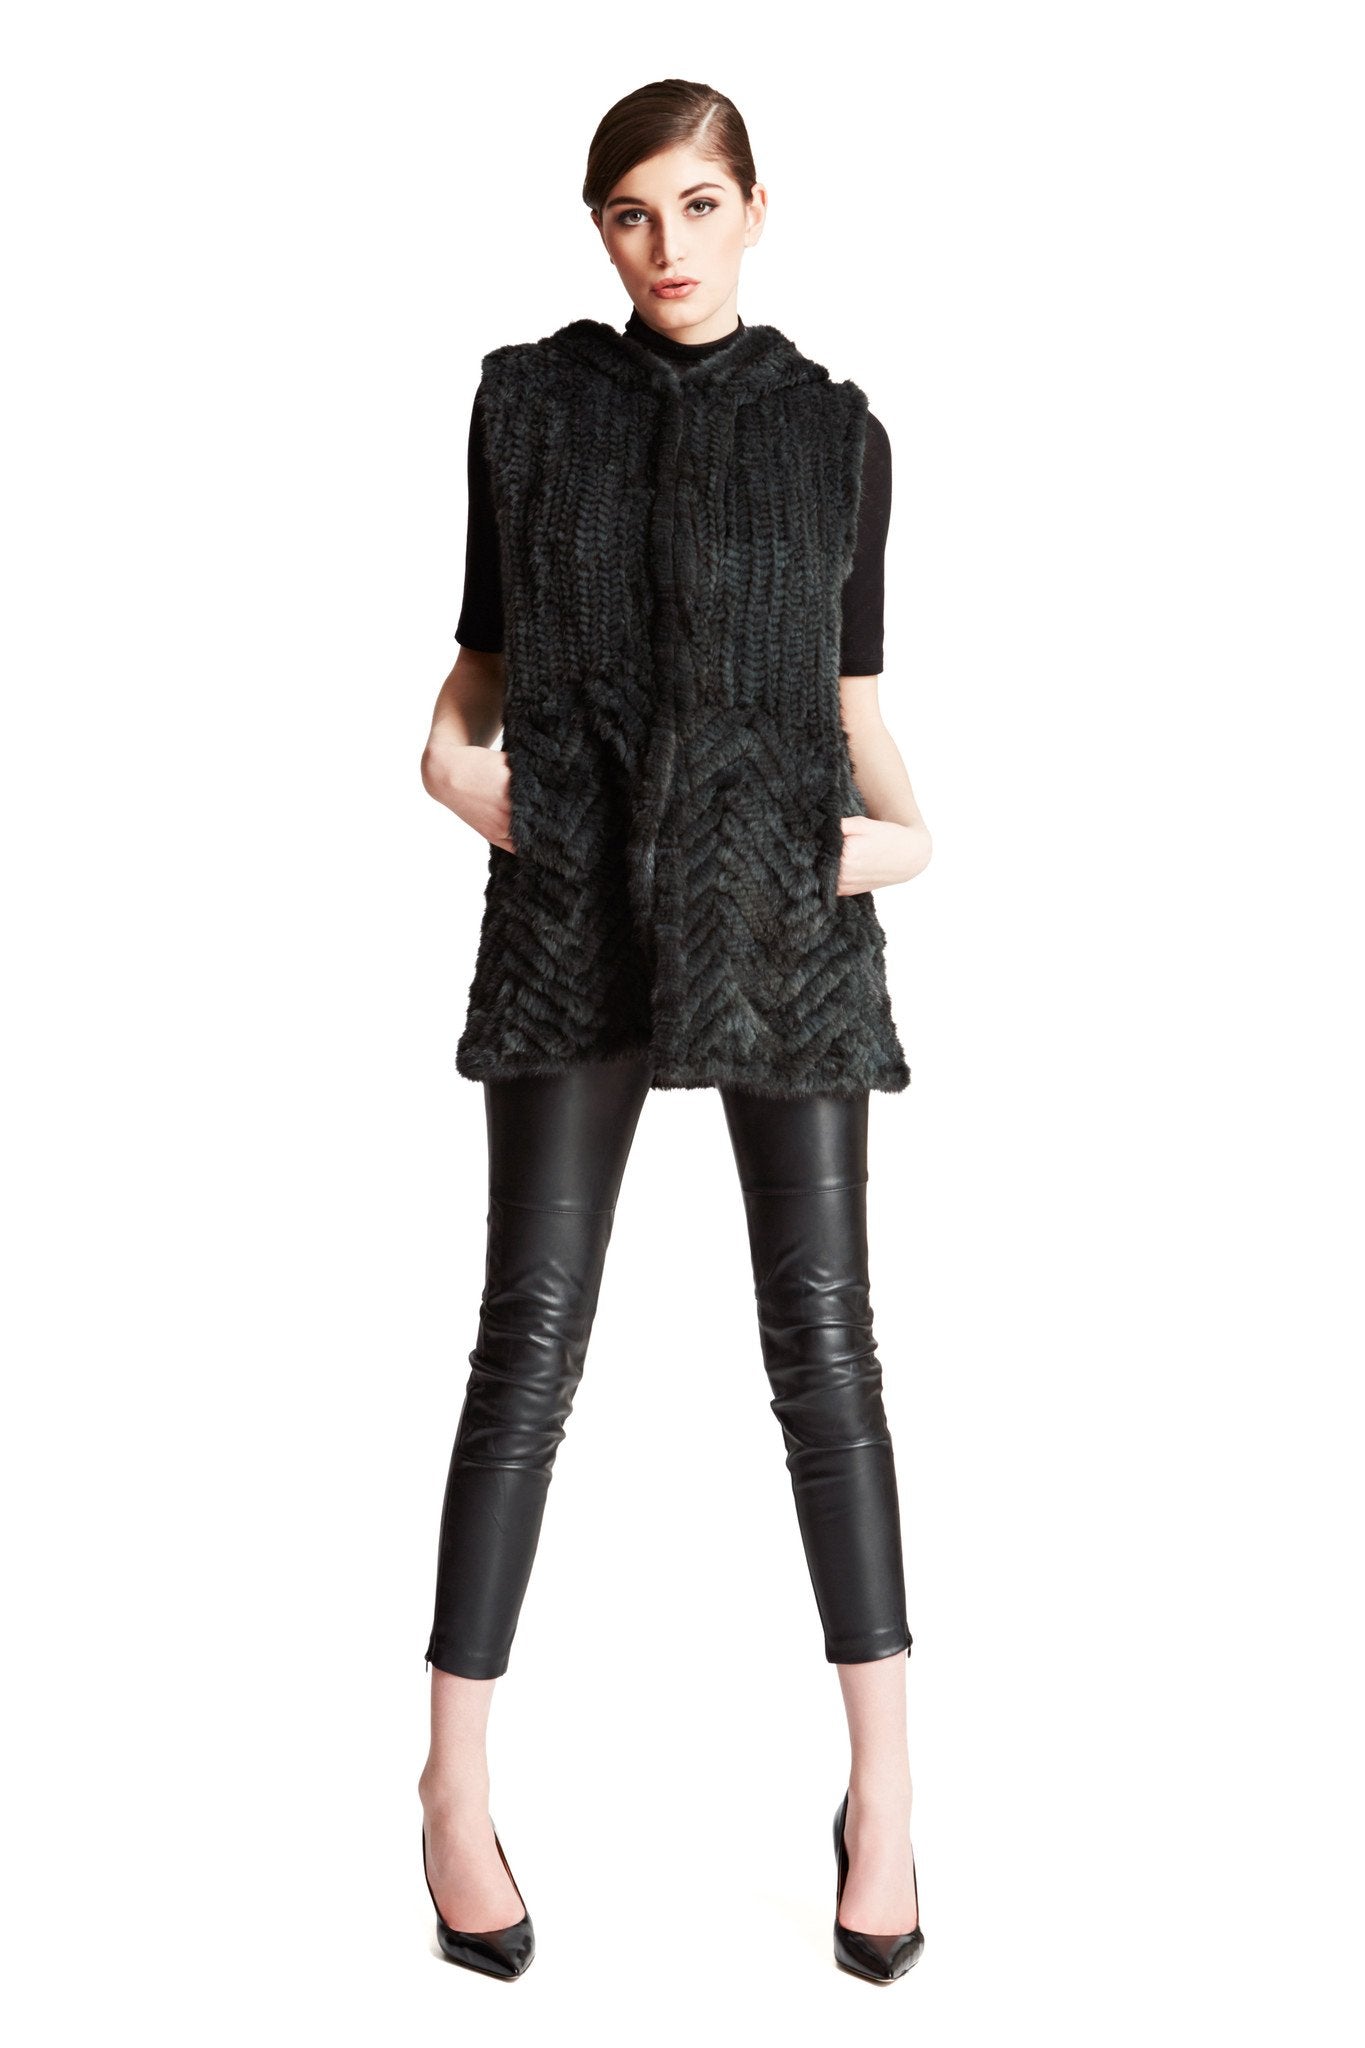 THE LOOE - Knitted Mink Fur Vest with Chevron Panel and Hood - paulamariecollection